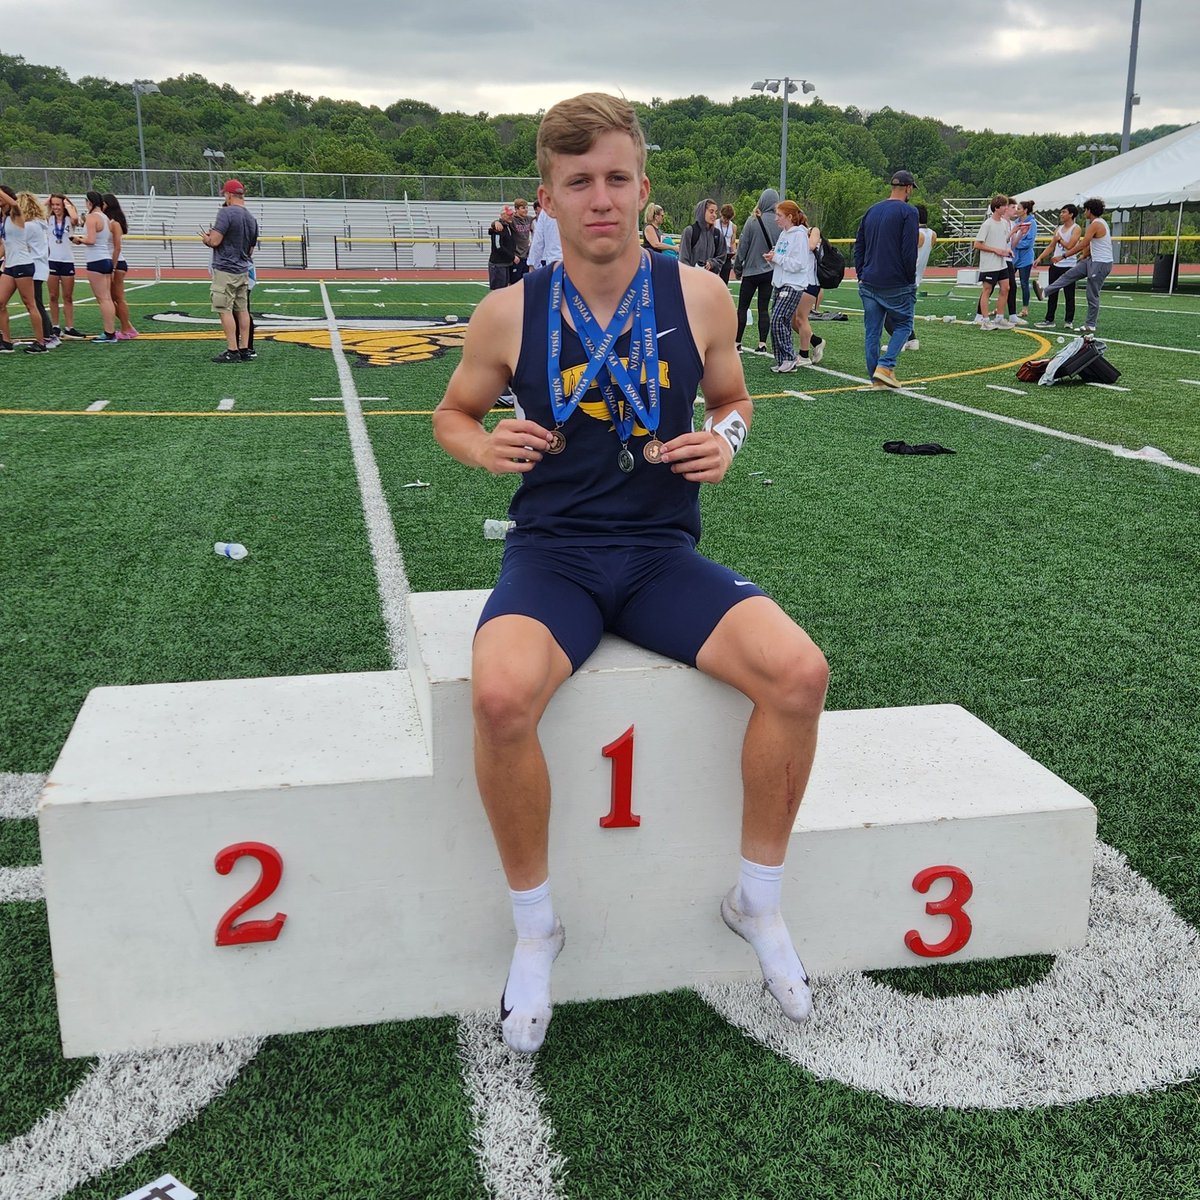 Big weekend for Zack Mountain, 3rd in LJ (21'5) 5th in HJ and Anchored 2nd place 4x400 (3:27.66 50.44 split) @vthsathletics @VernonTwpSD @dailyrecordspts @NJHSports